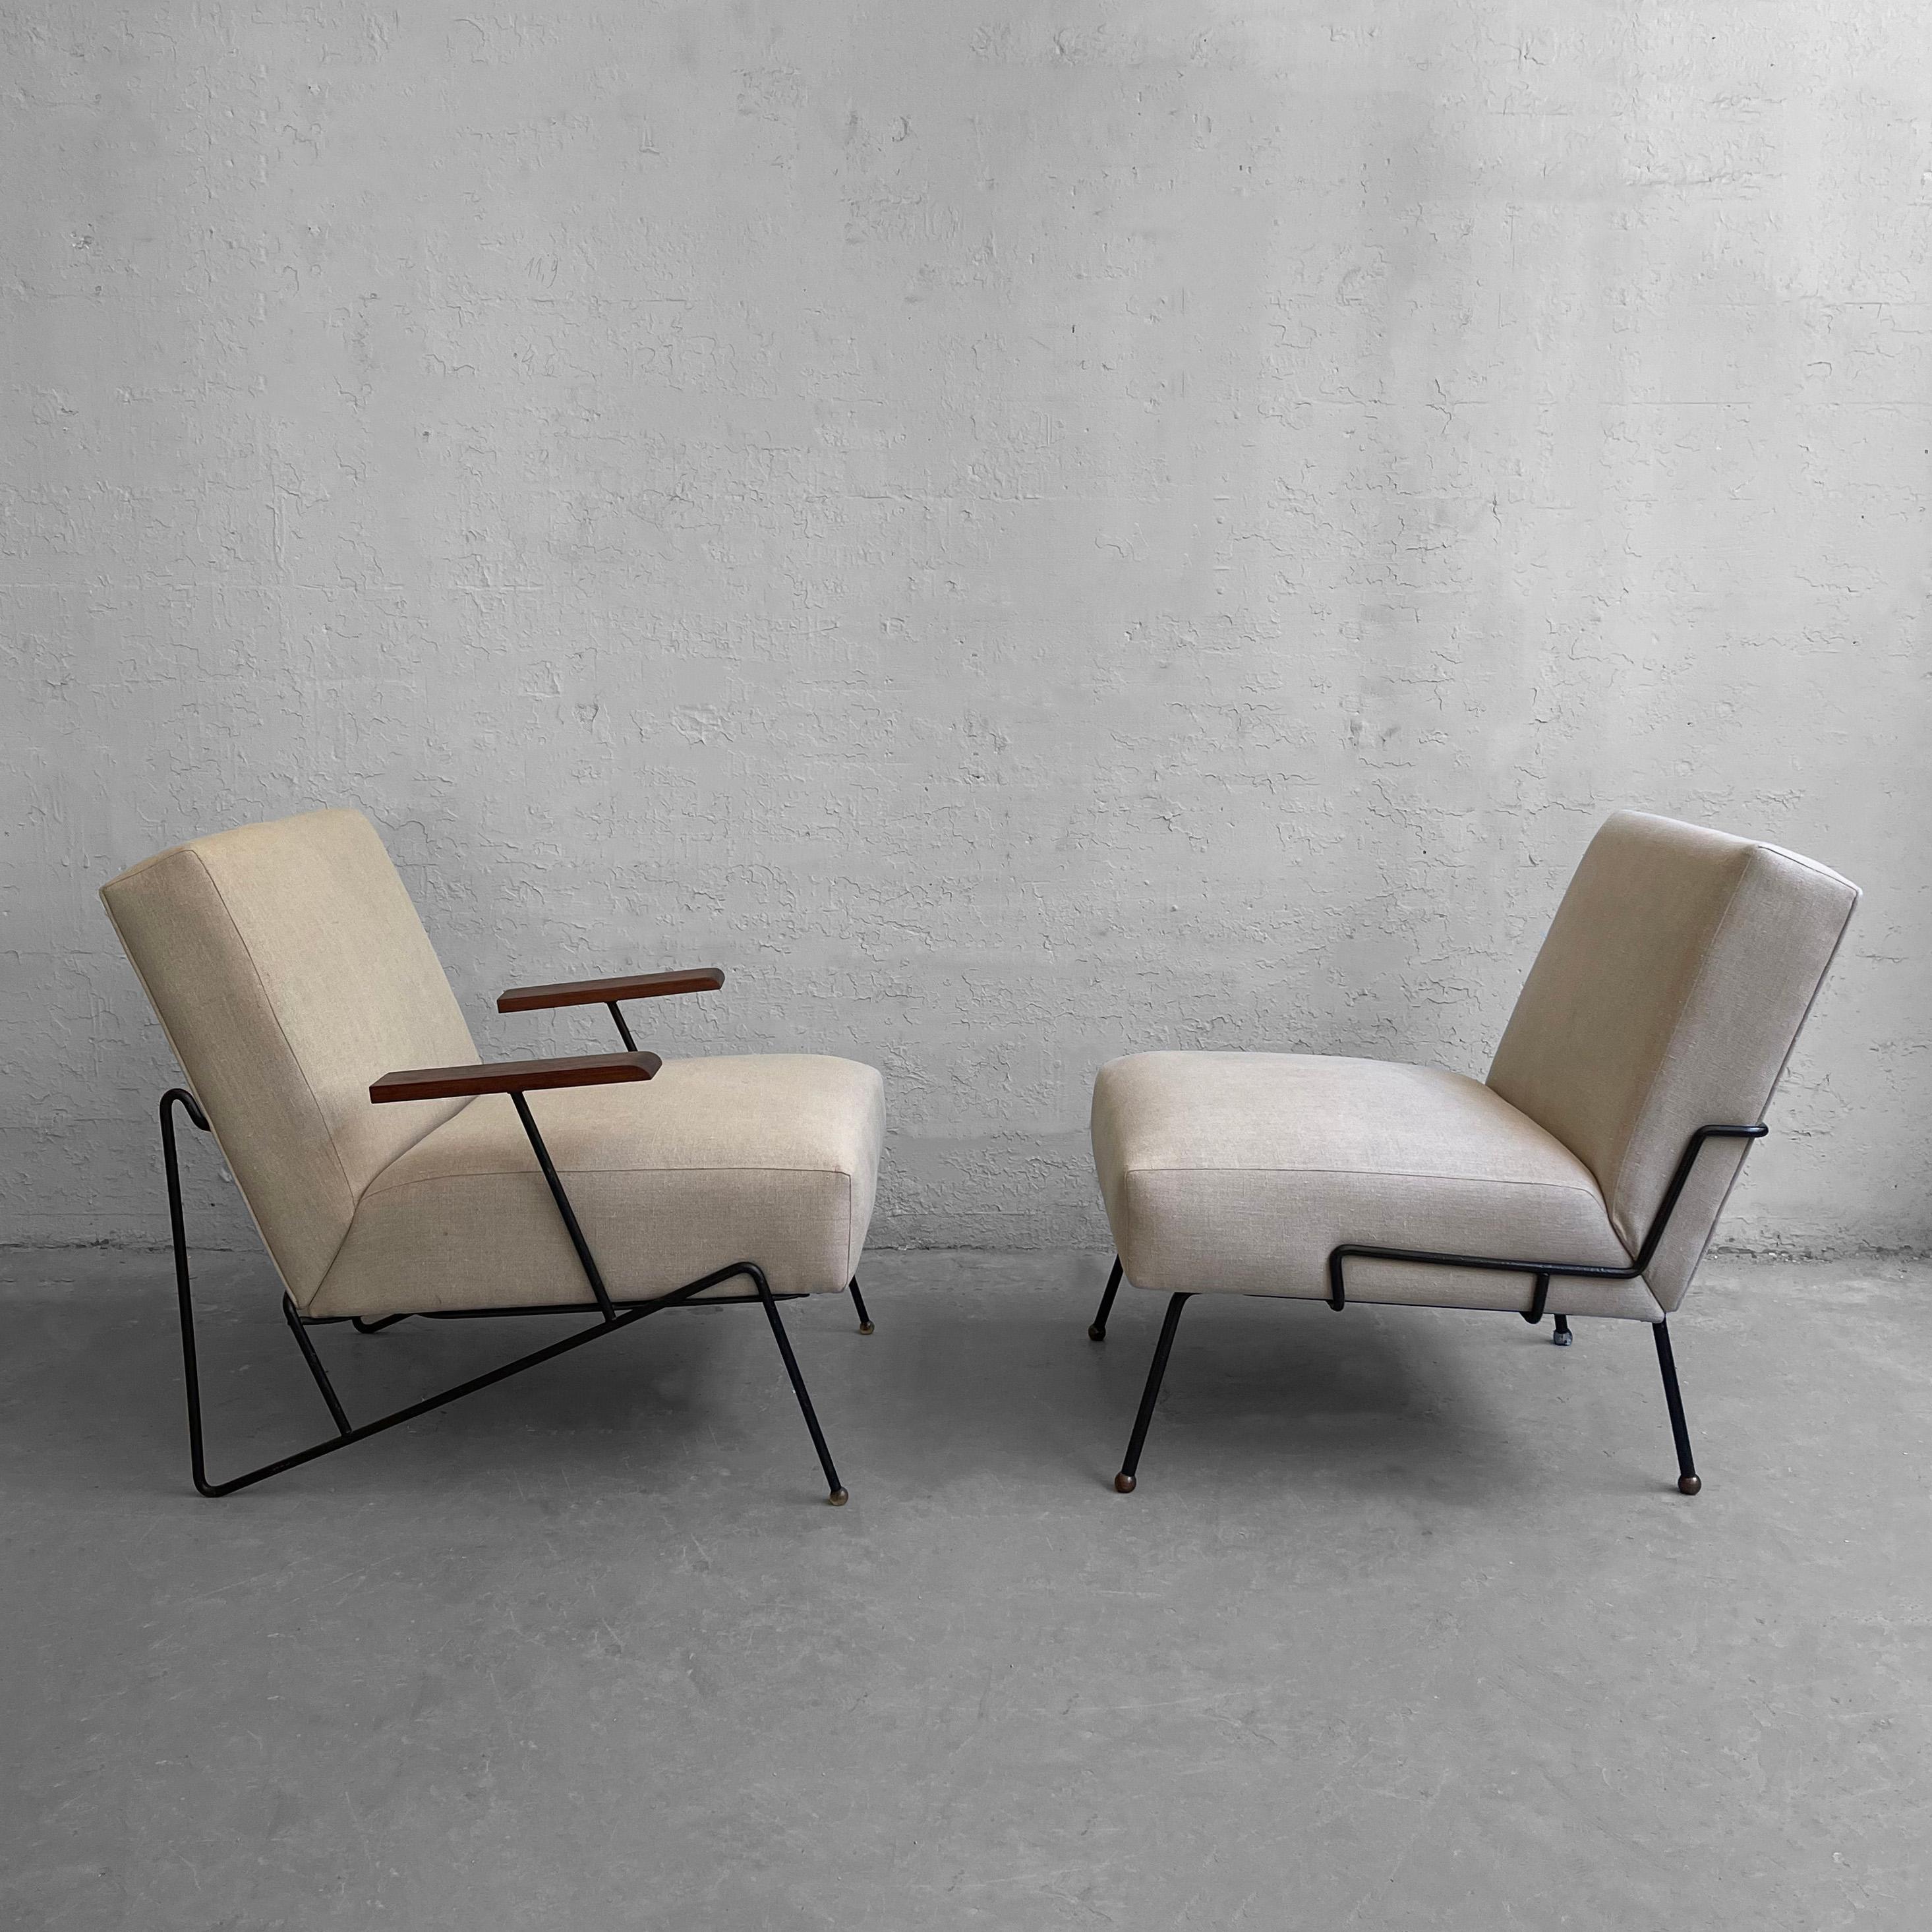 American Wrought Iron Lounge Chairs by Dan Johnson for Pacific Iron